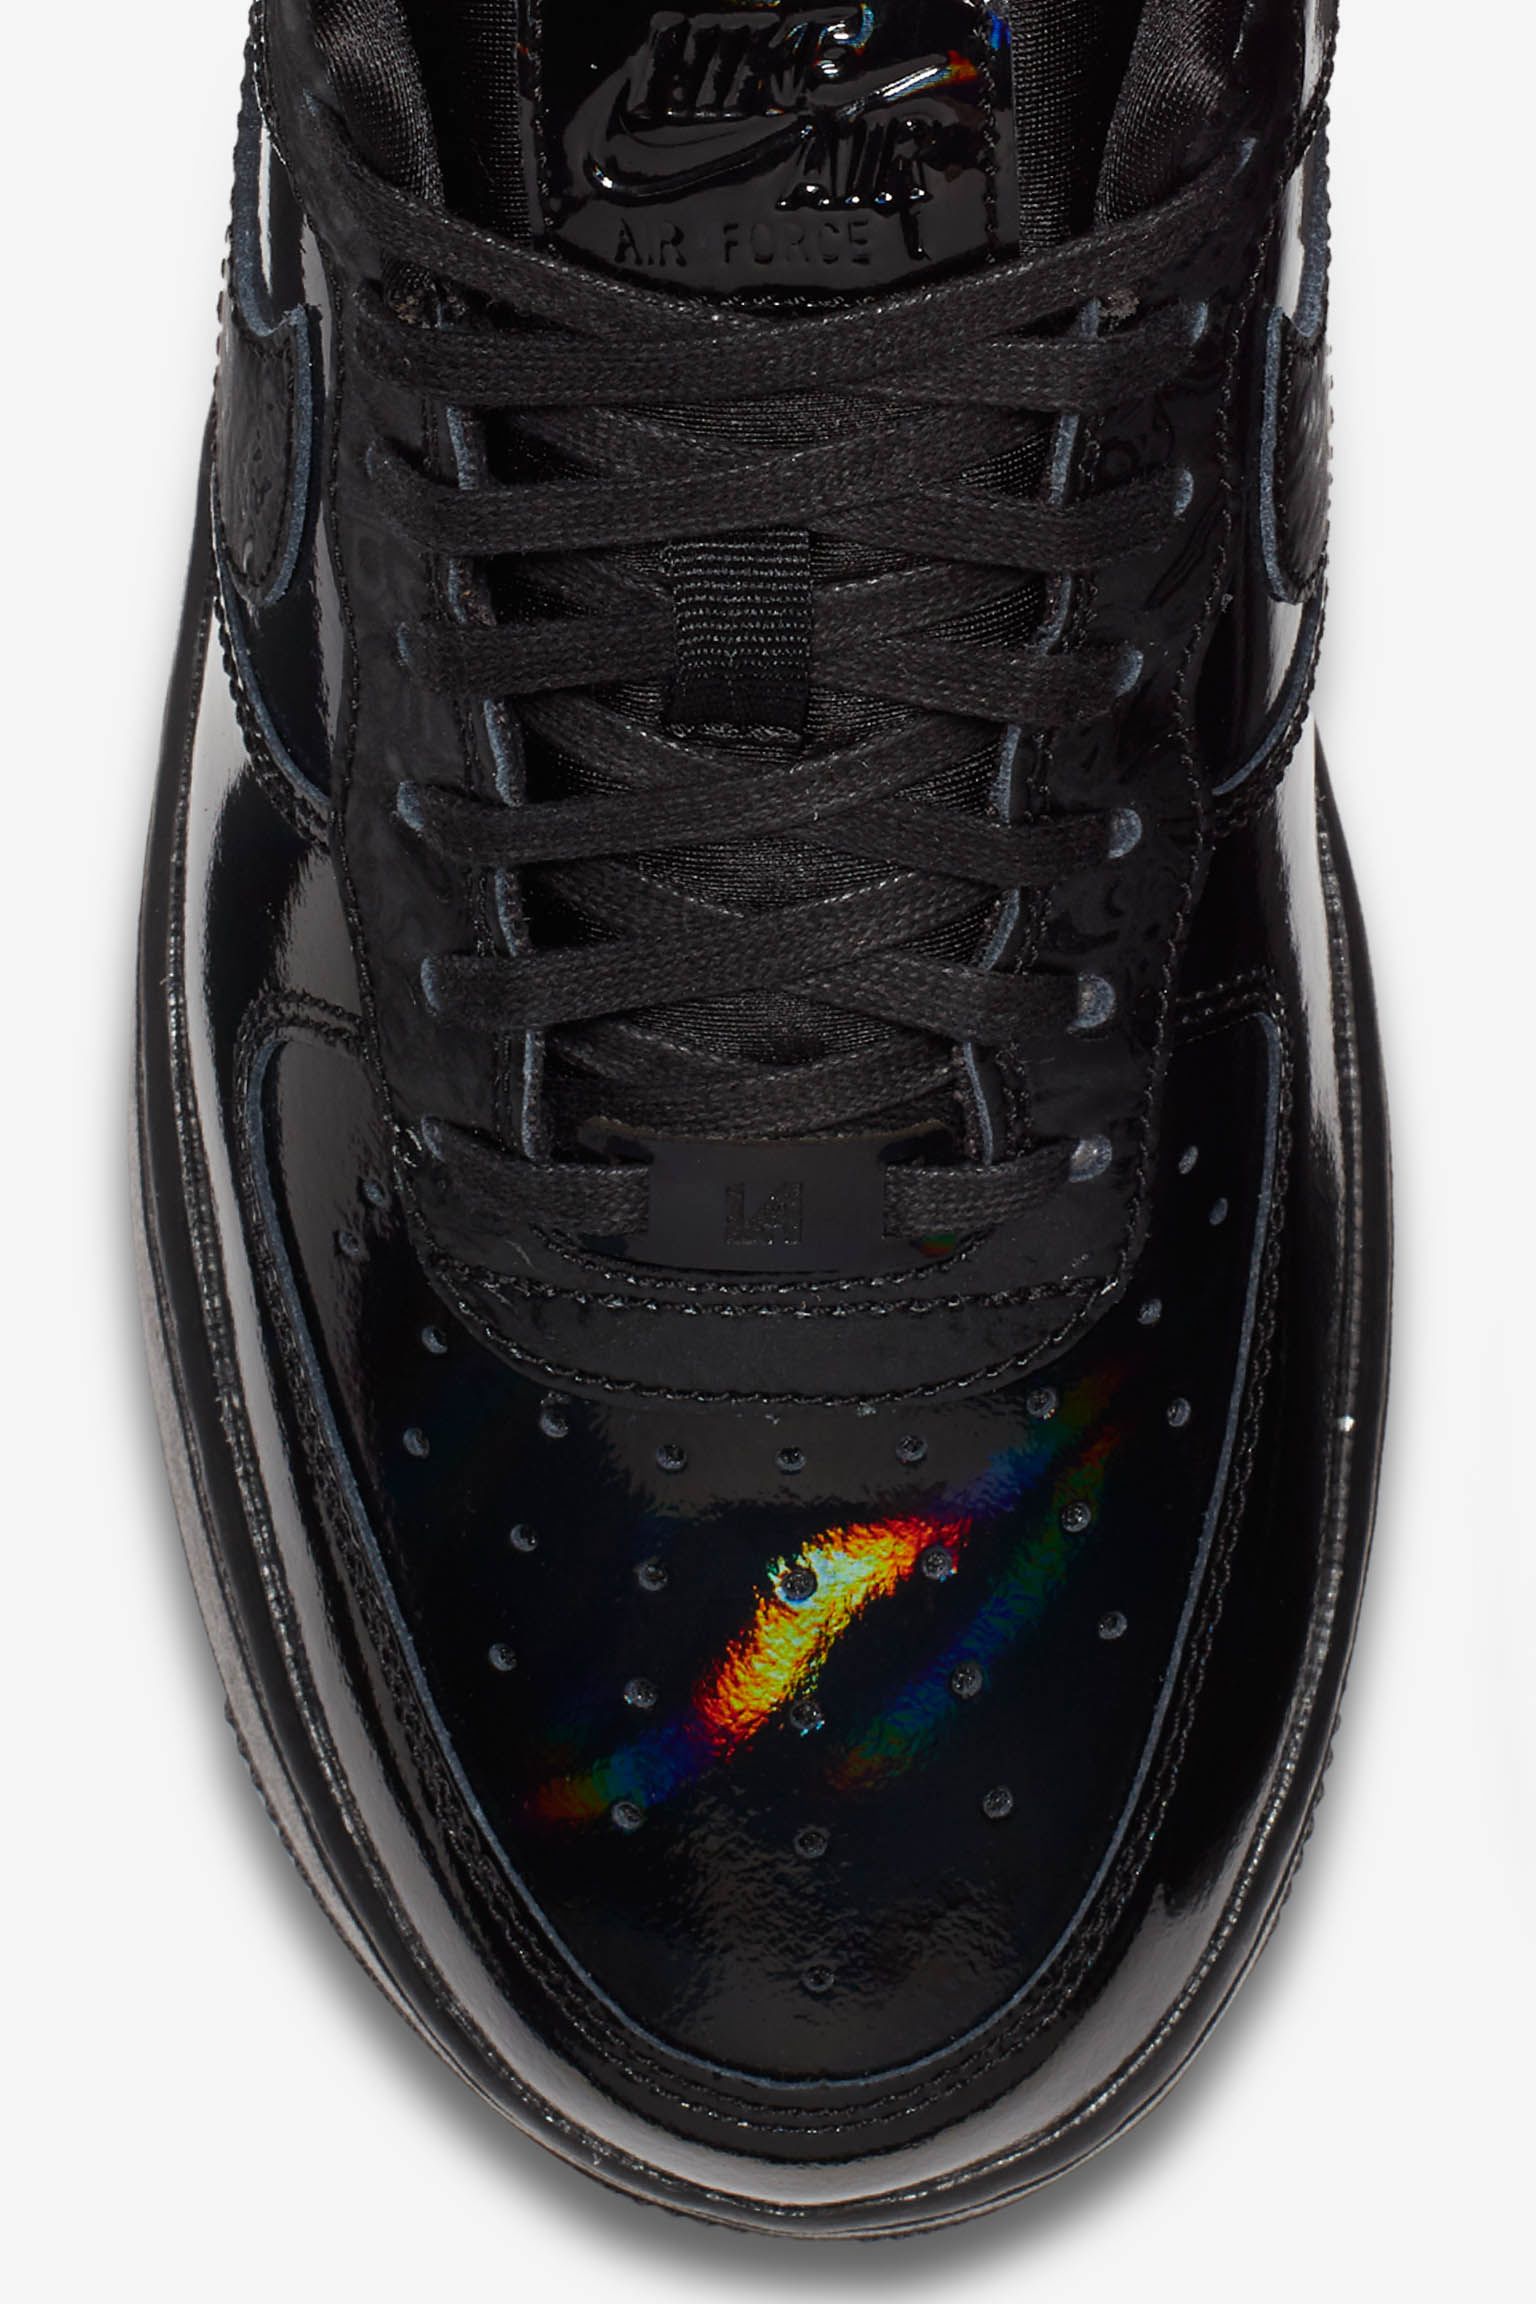 air force 1 black holographic